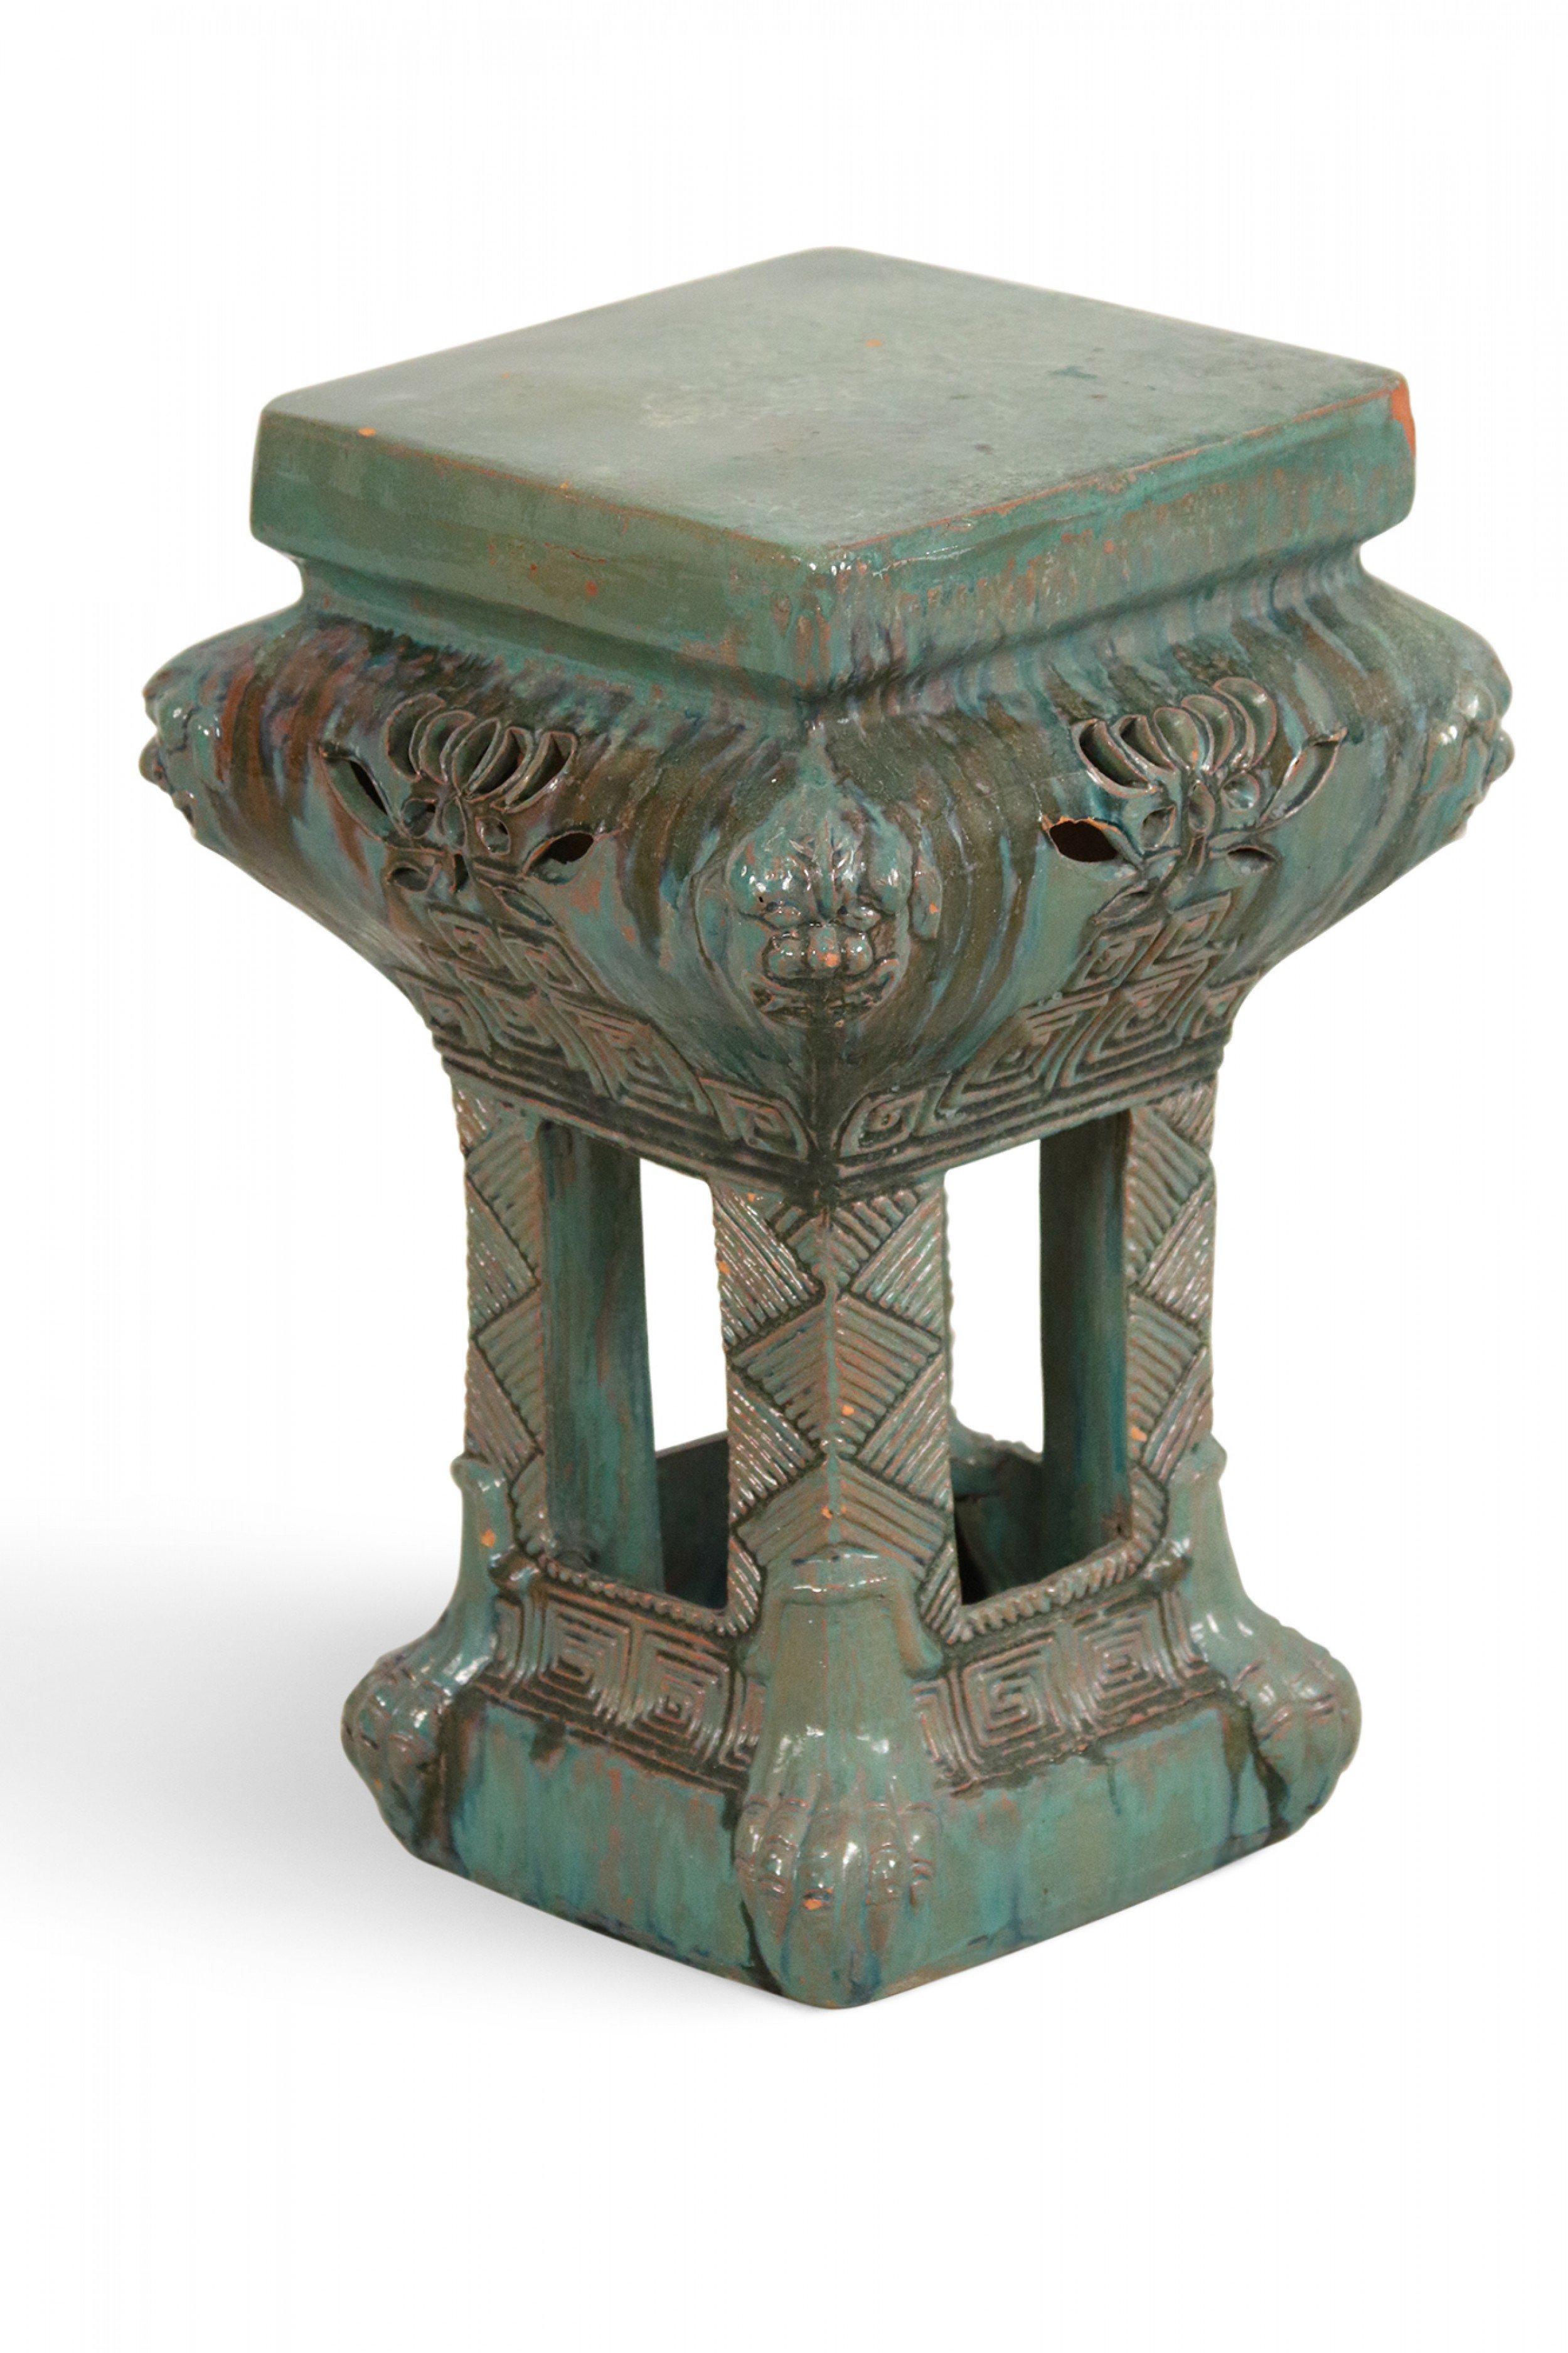 Chinese ceramic garden seat with bowed decorative top on four incised column supports with a square base and top and green and gray glazed finish.